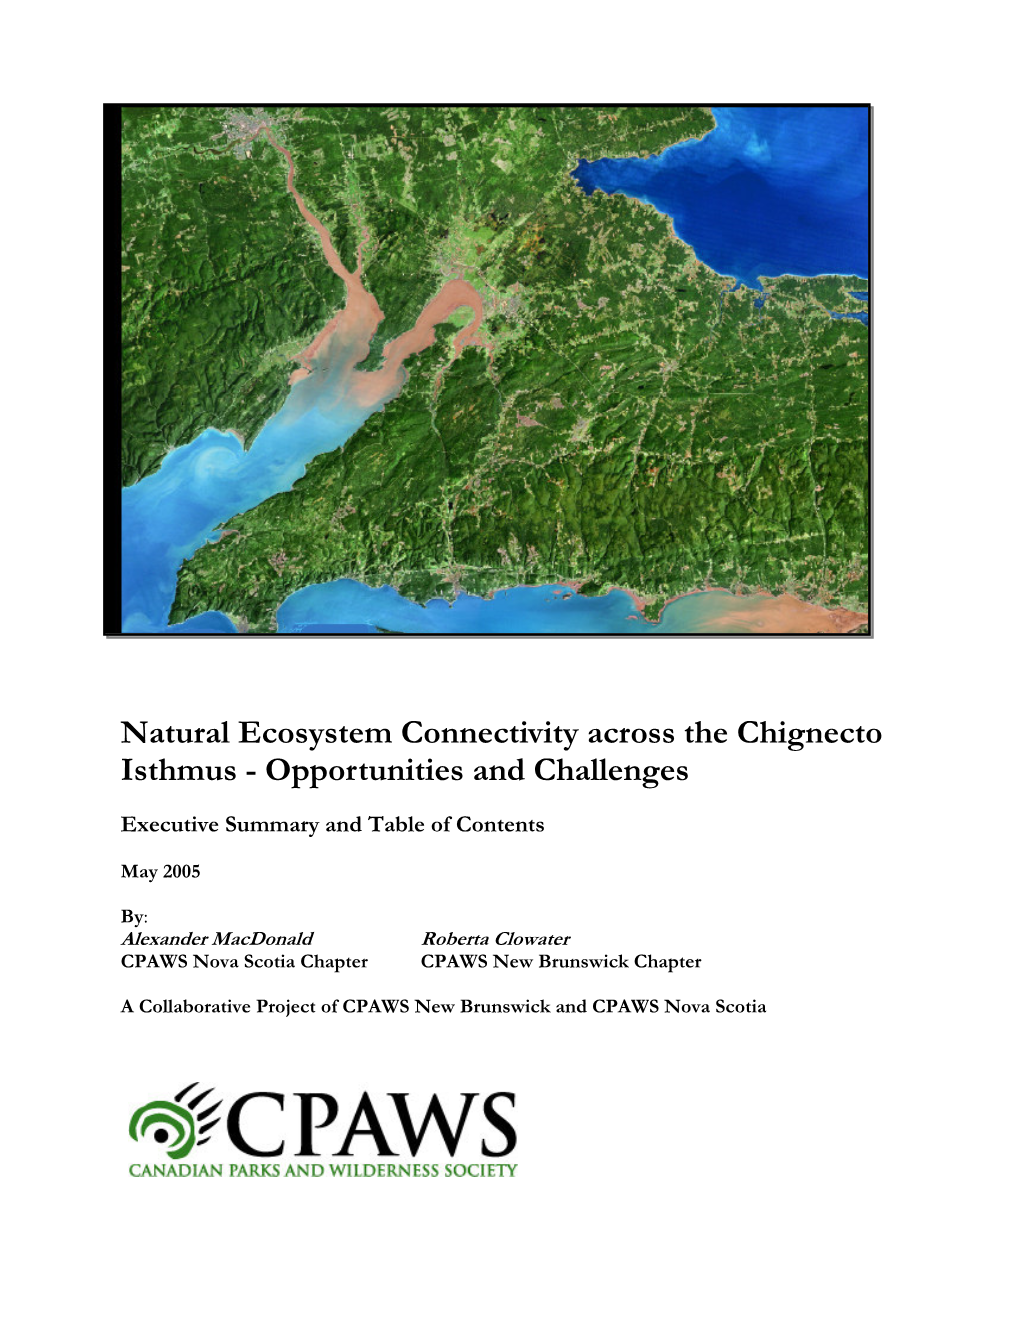 Natural Ecosystem Connectivity Across the Chignecto Isthmus - Opportunities and Challenges